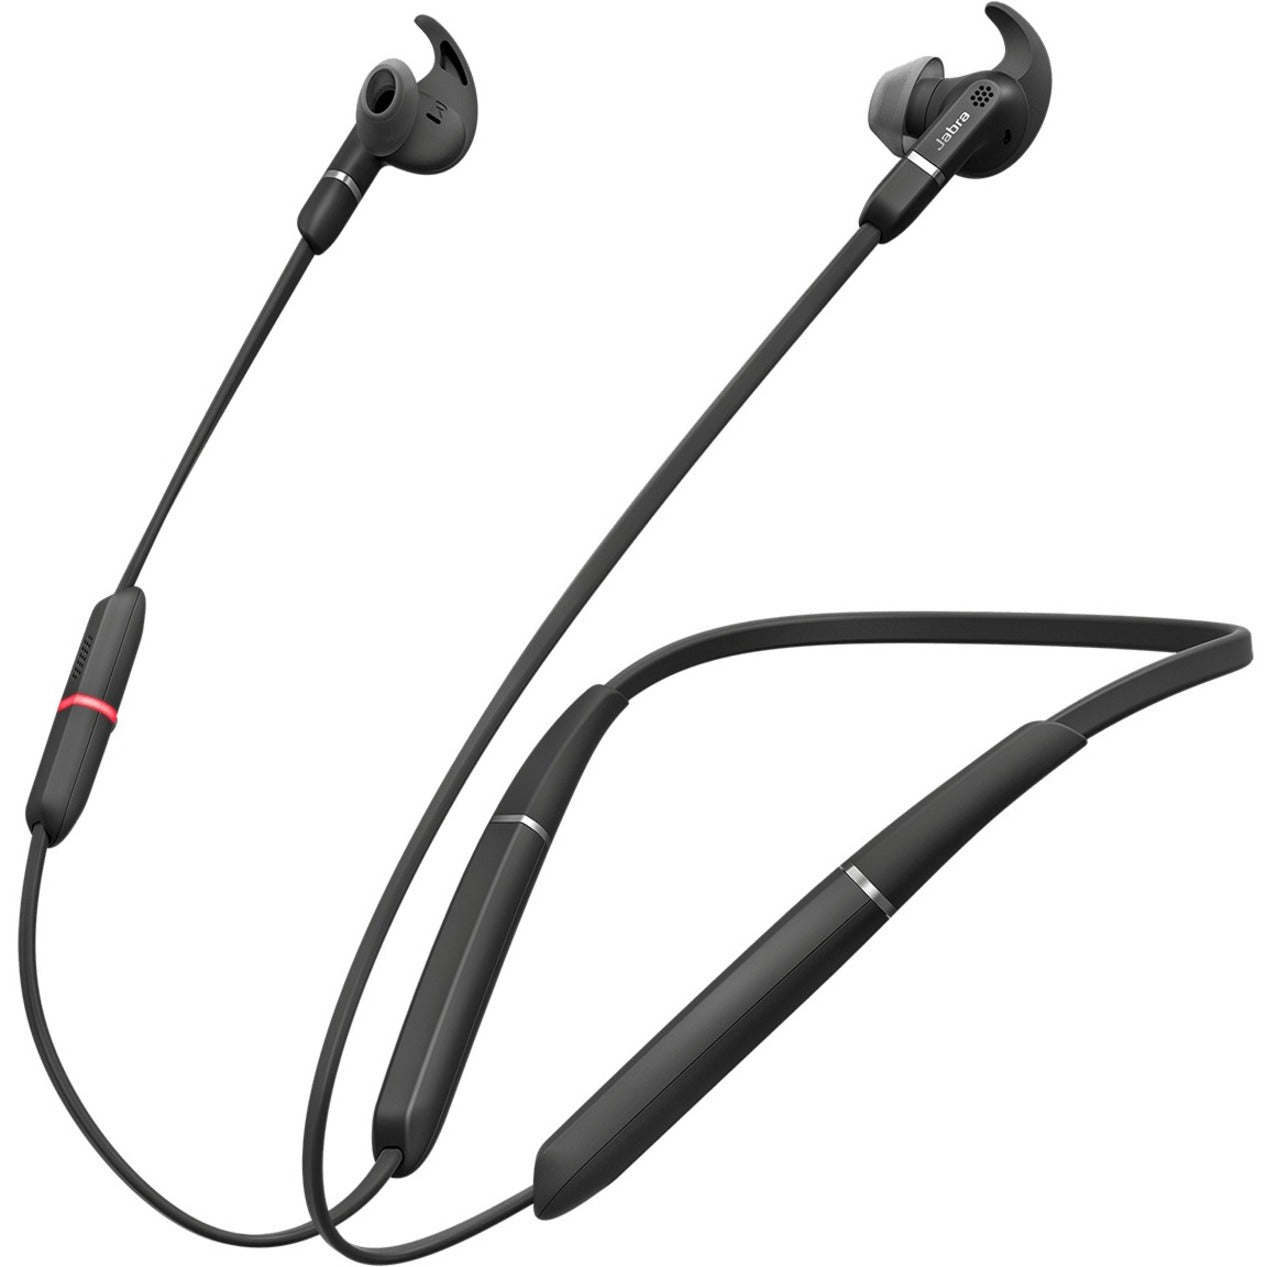 Jabra 6599-623-109 EVOLVE 65e MS Earset, Wireless Bluetooth Stereo Earbuds with Noise Cancelling